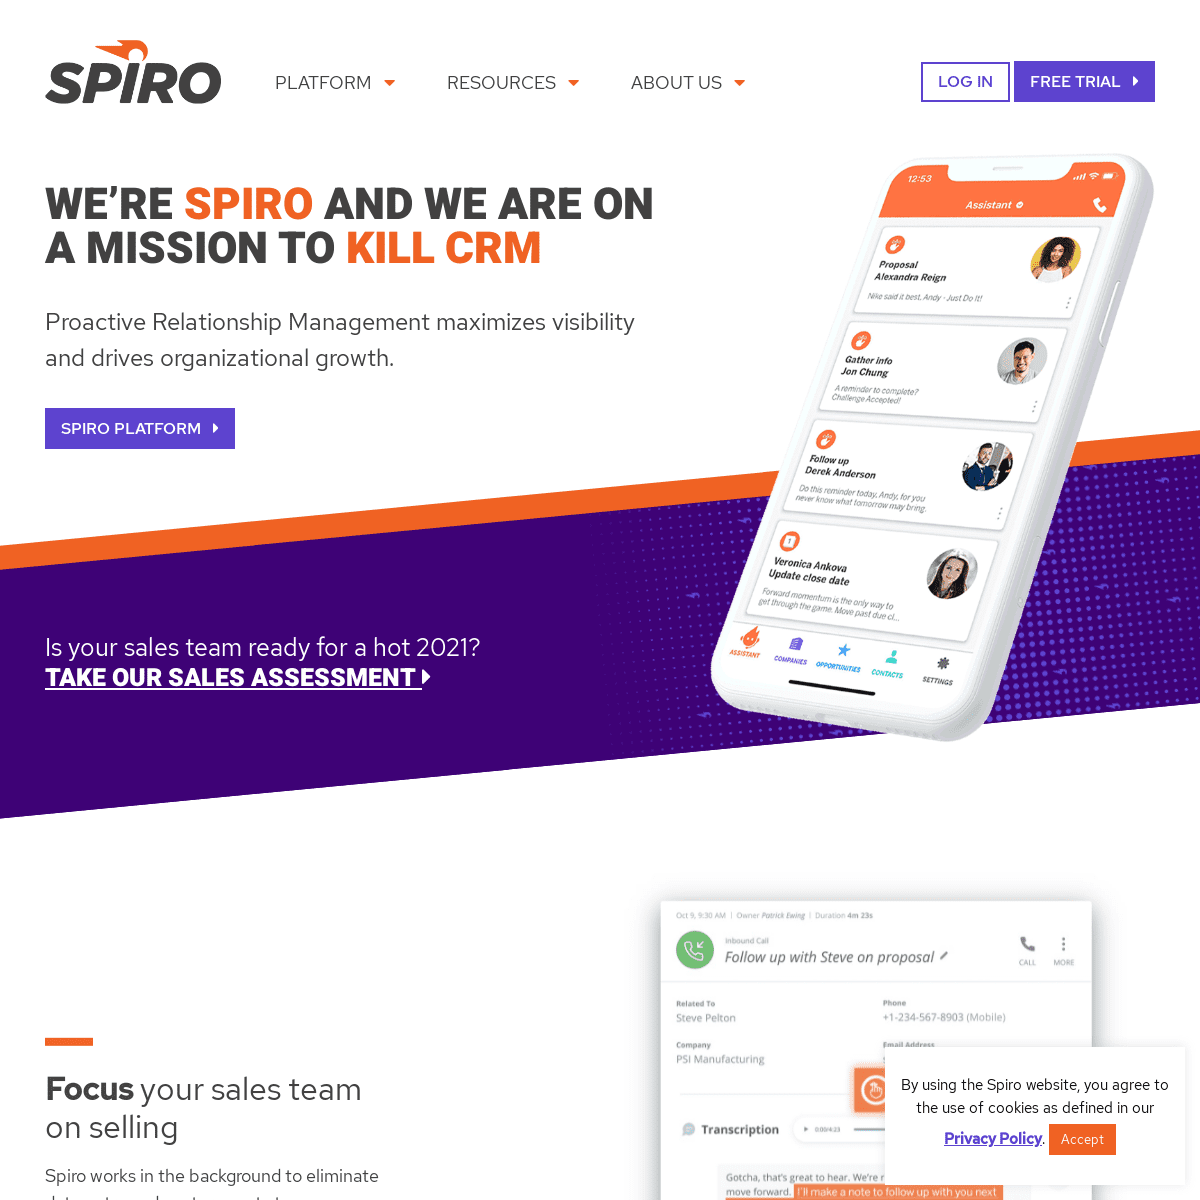 A complete backup of https://spiro.ai